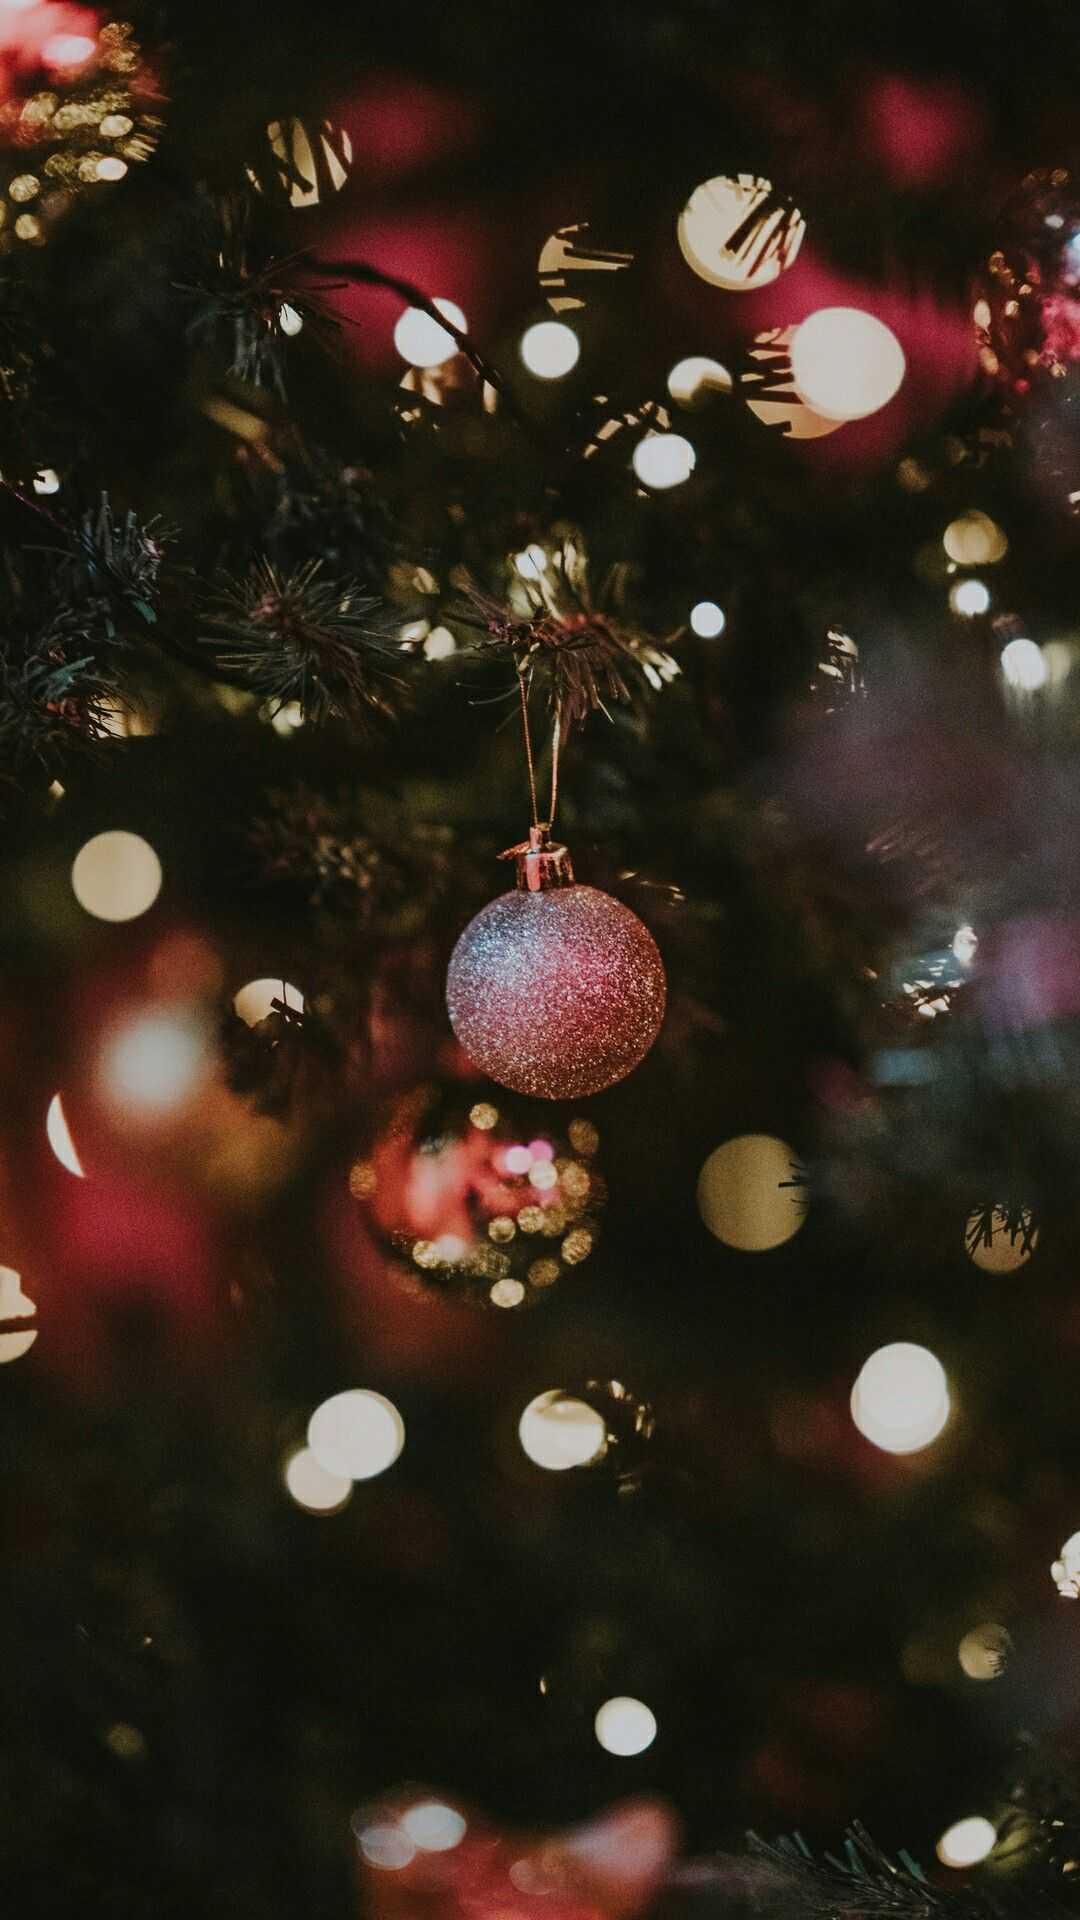 IPhone wallpaper of a Christmas tree with a red ornament hanging from it. - Christmas